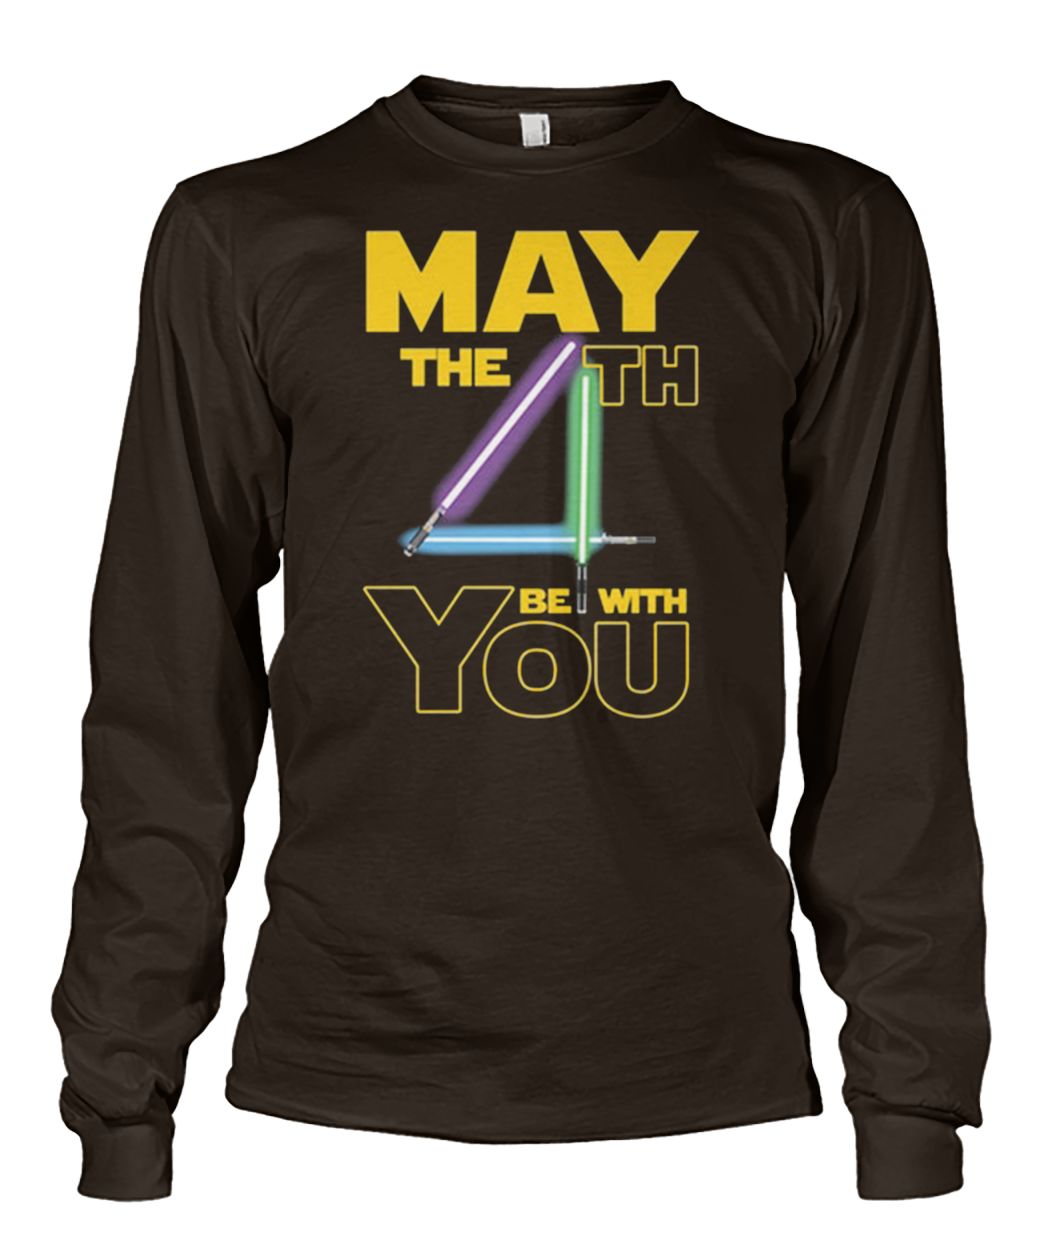 Star wars may the 4th be with you unisex long sleeve